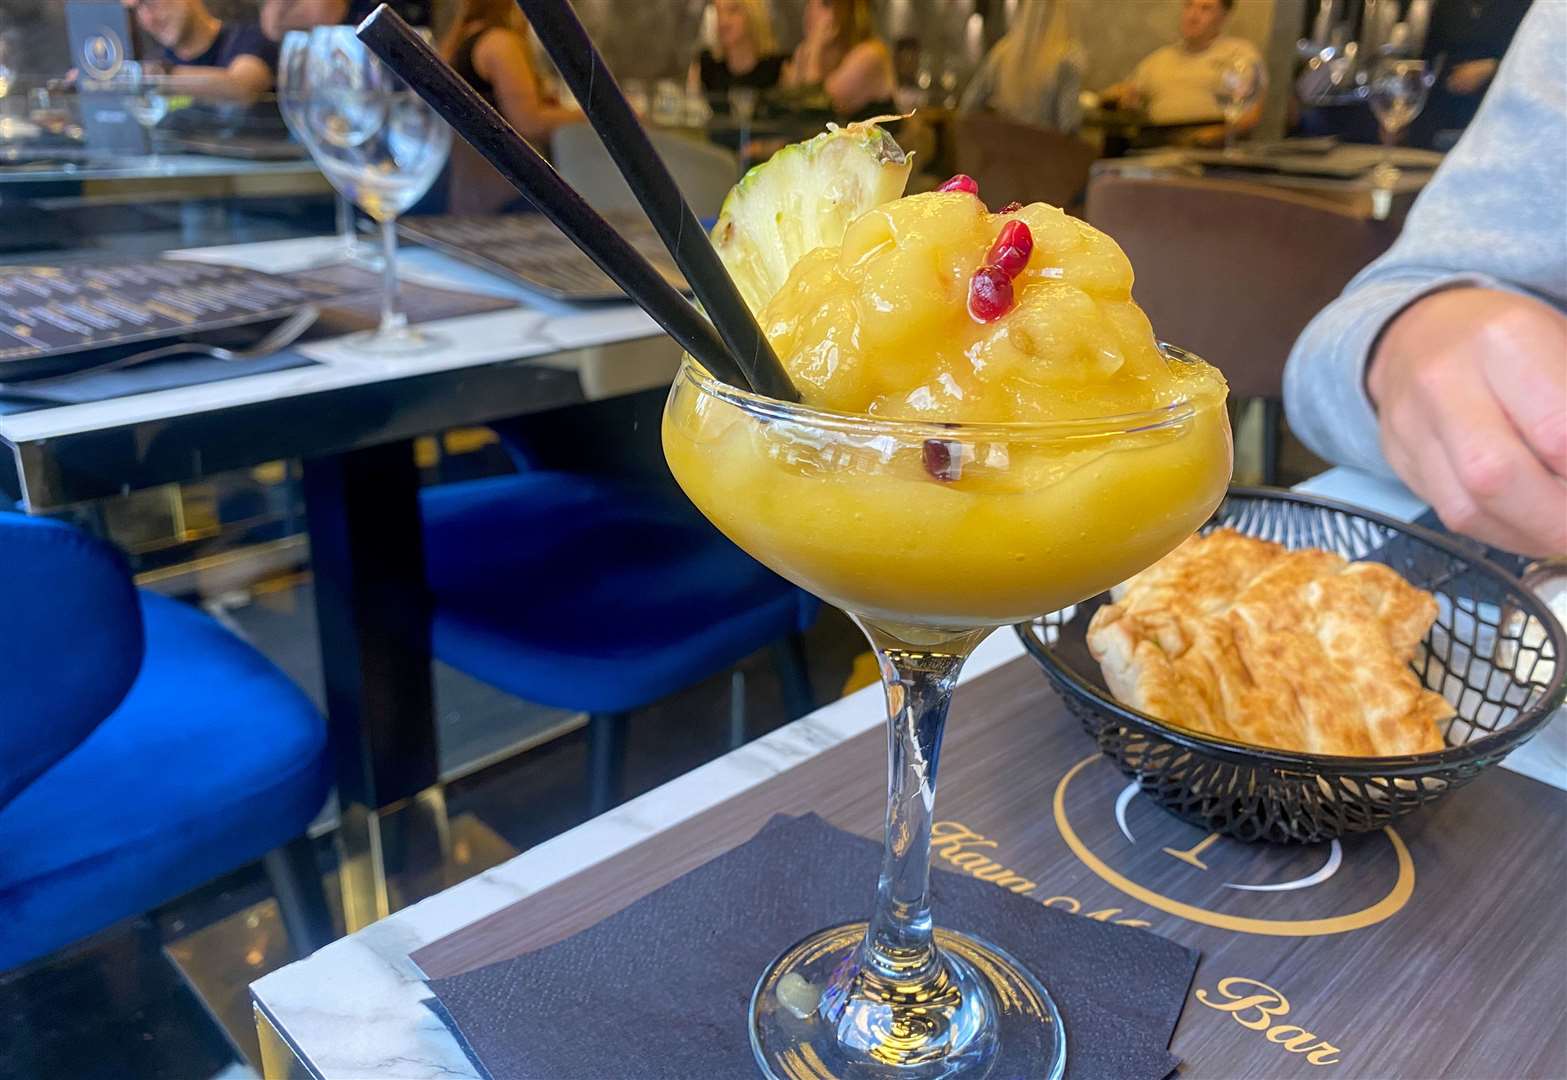 I tried a mango daquari mocktail and could barely tell it was booze-free